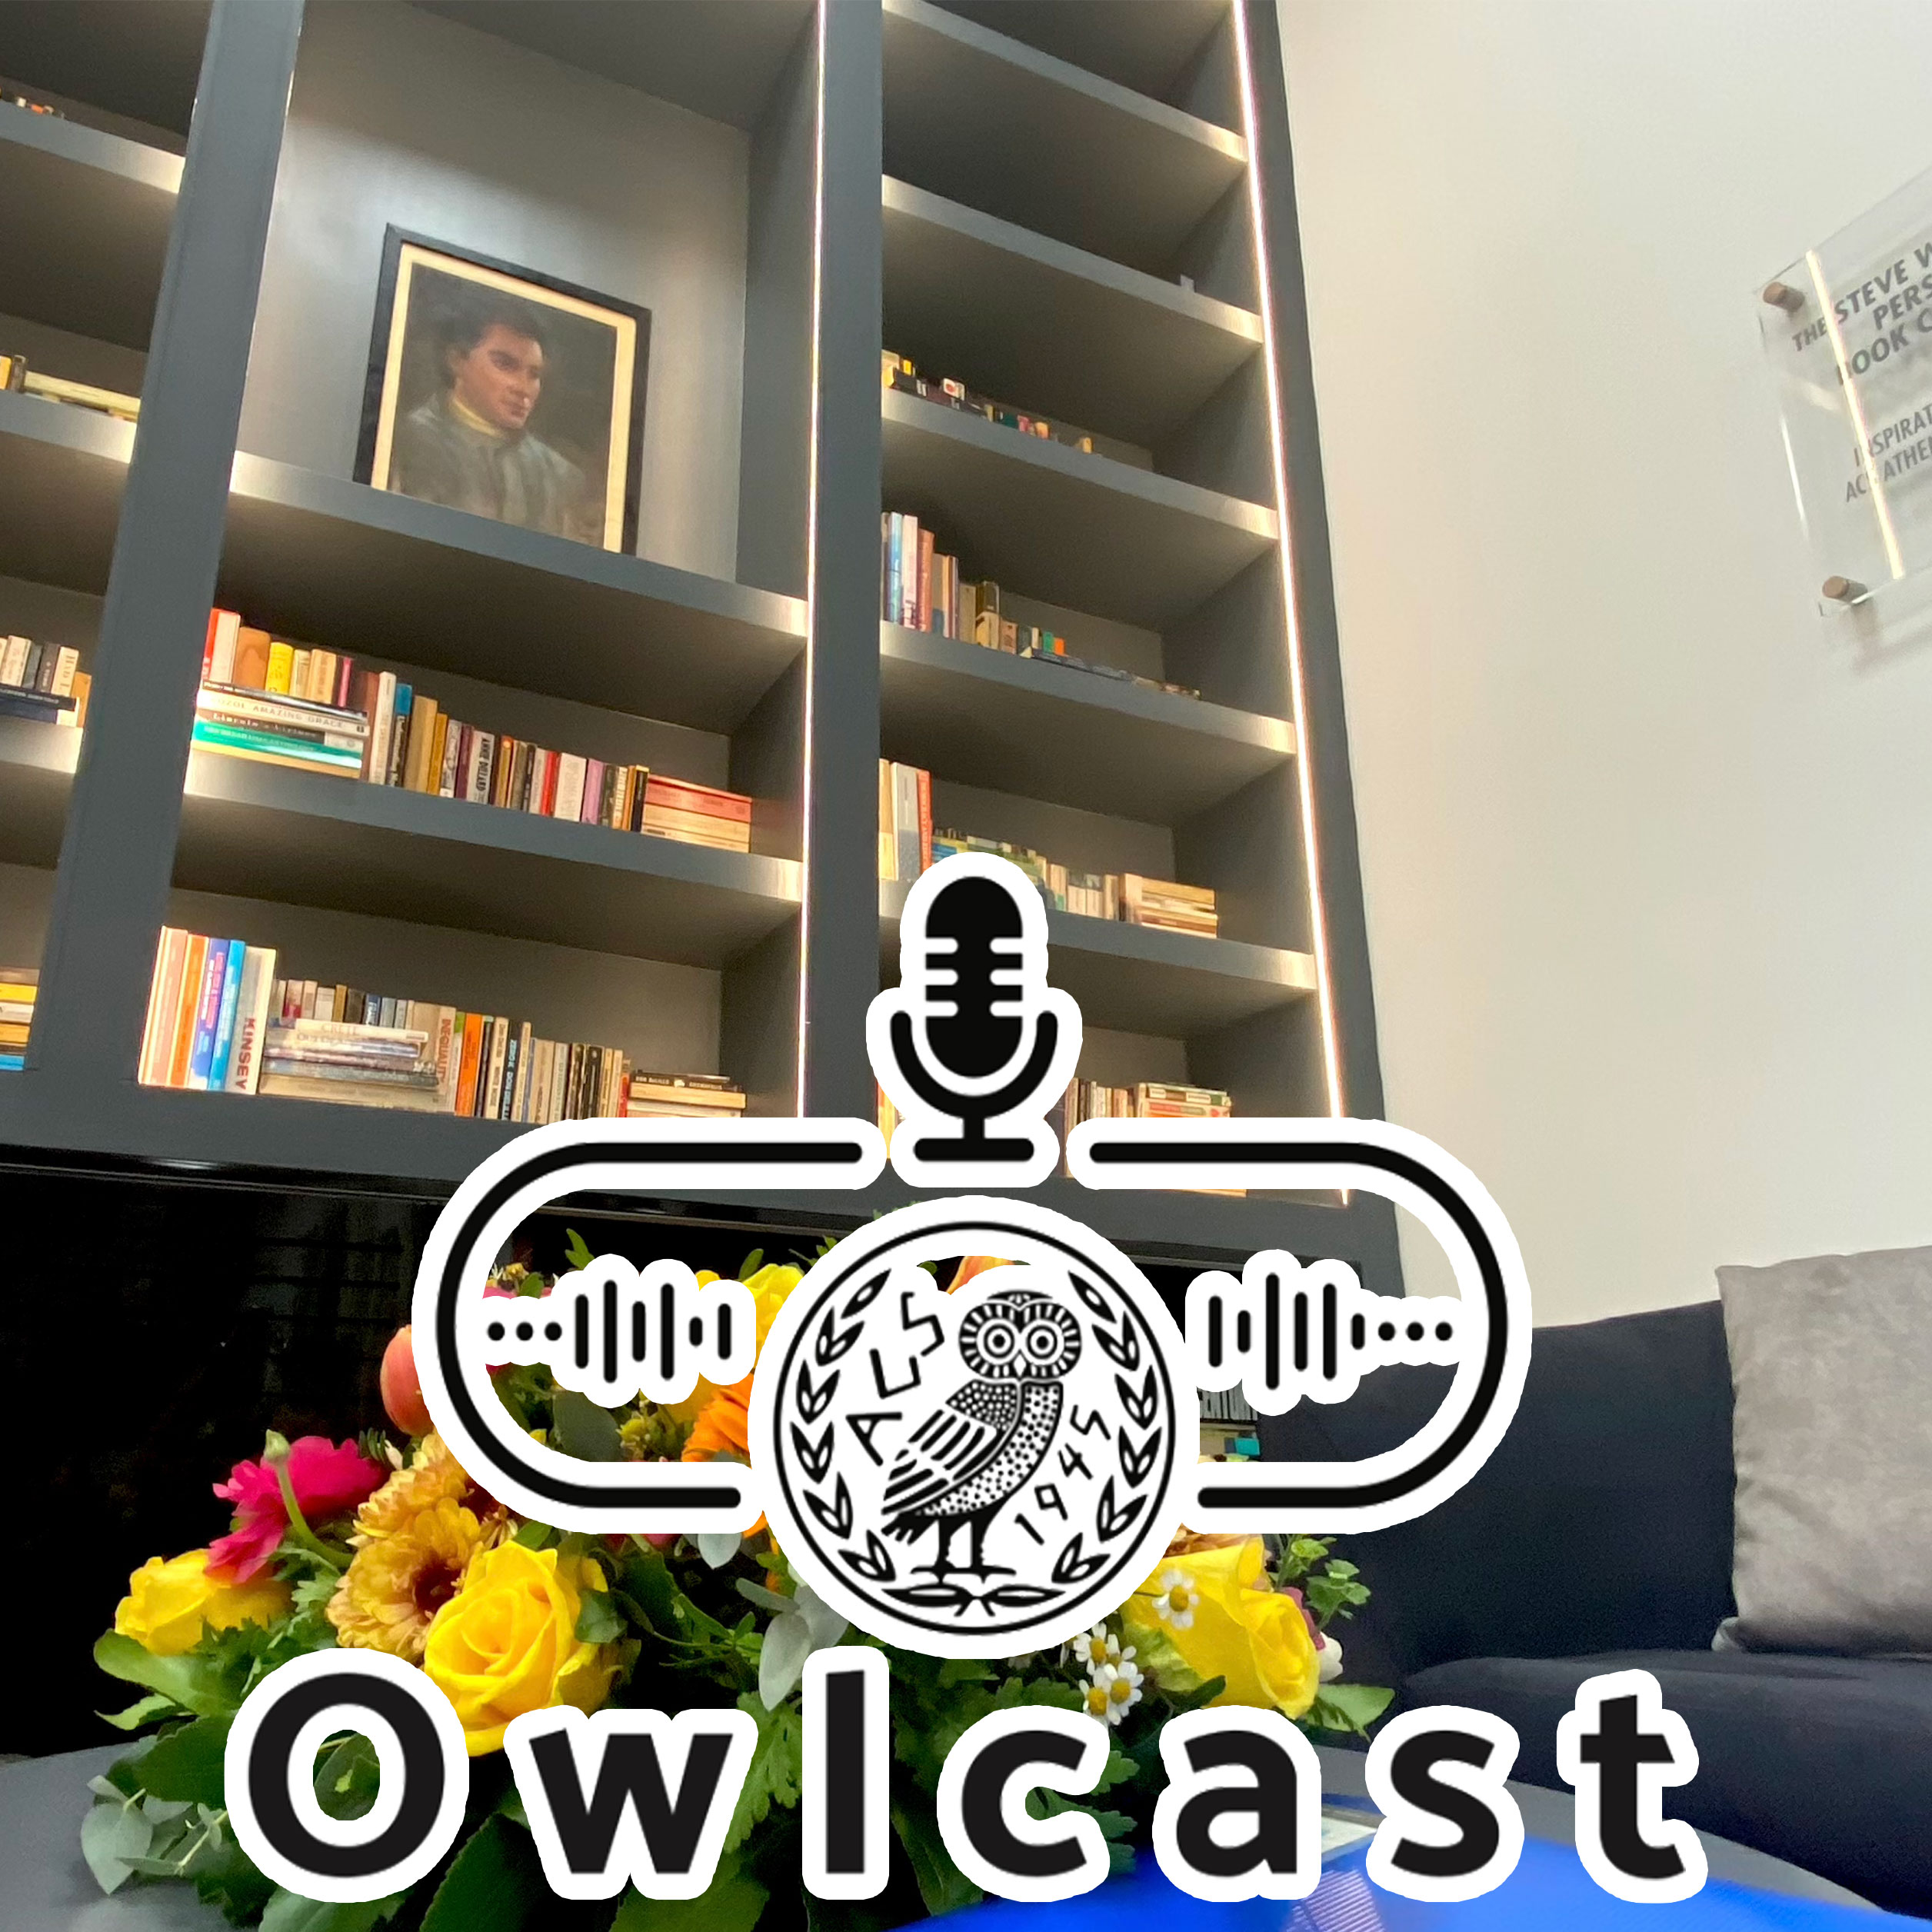 Owlcast 79 - The Steve Medeiros Book Collection at the Library